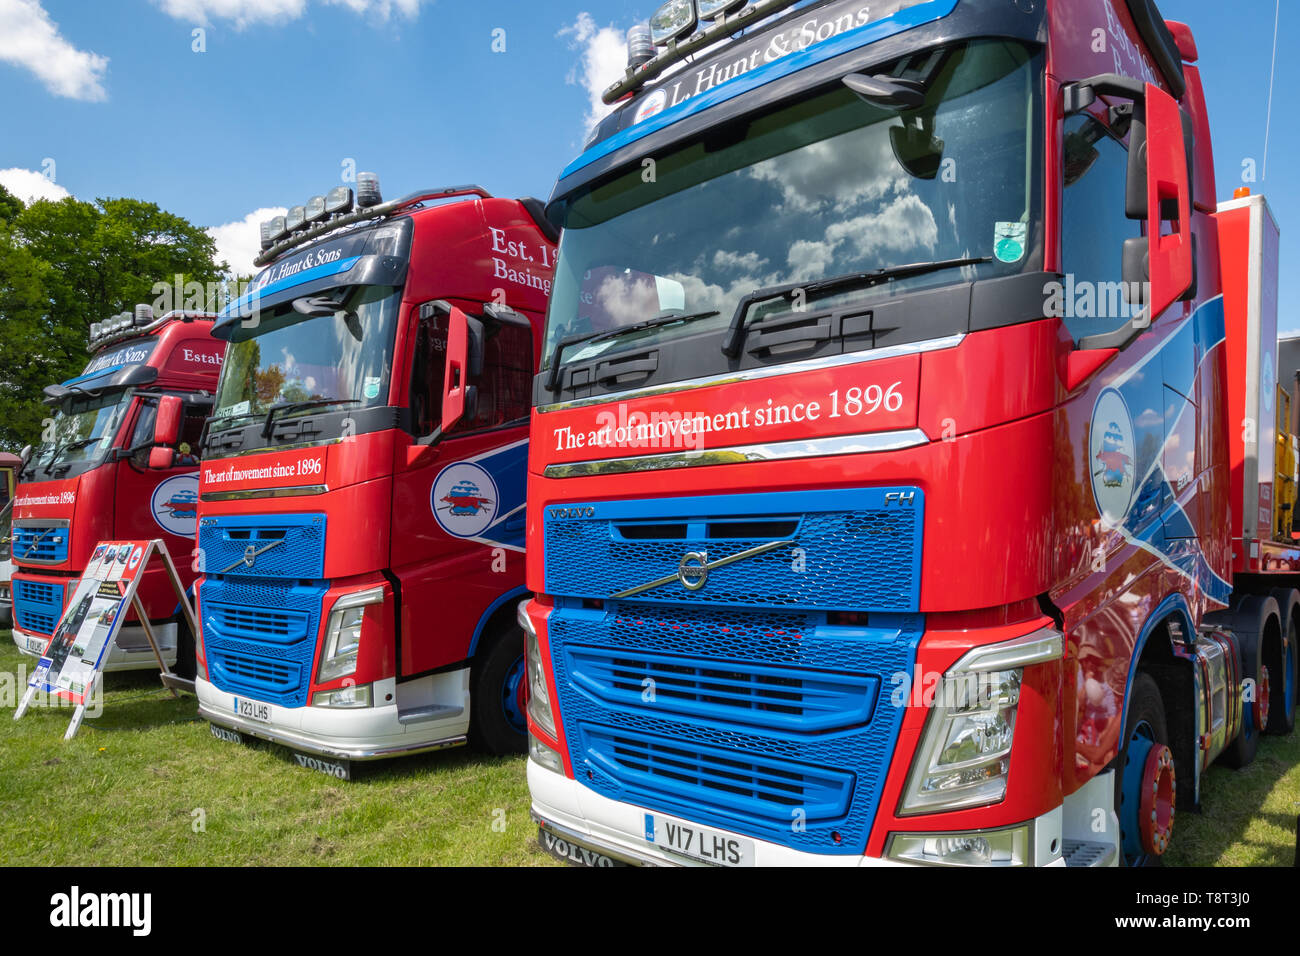 Three red lorries or trucks owned by L. Hunt & sons ltd haulage on display at the Basingstoke Transport Festival Stock Photo